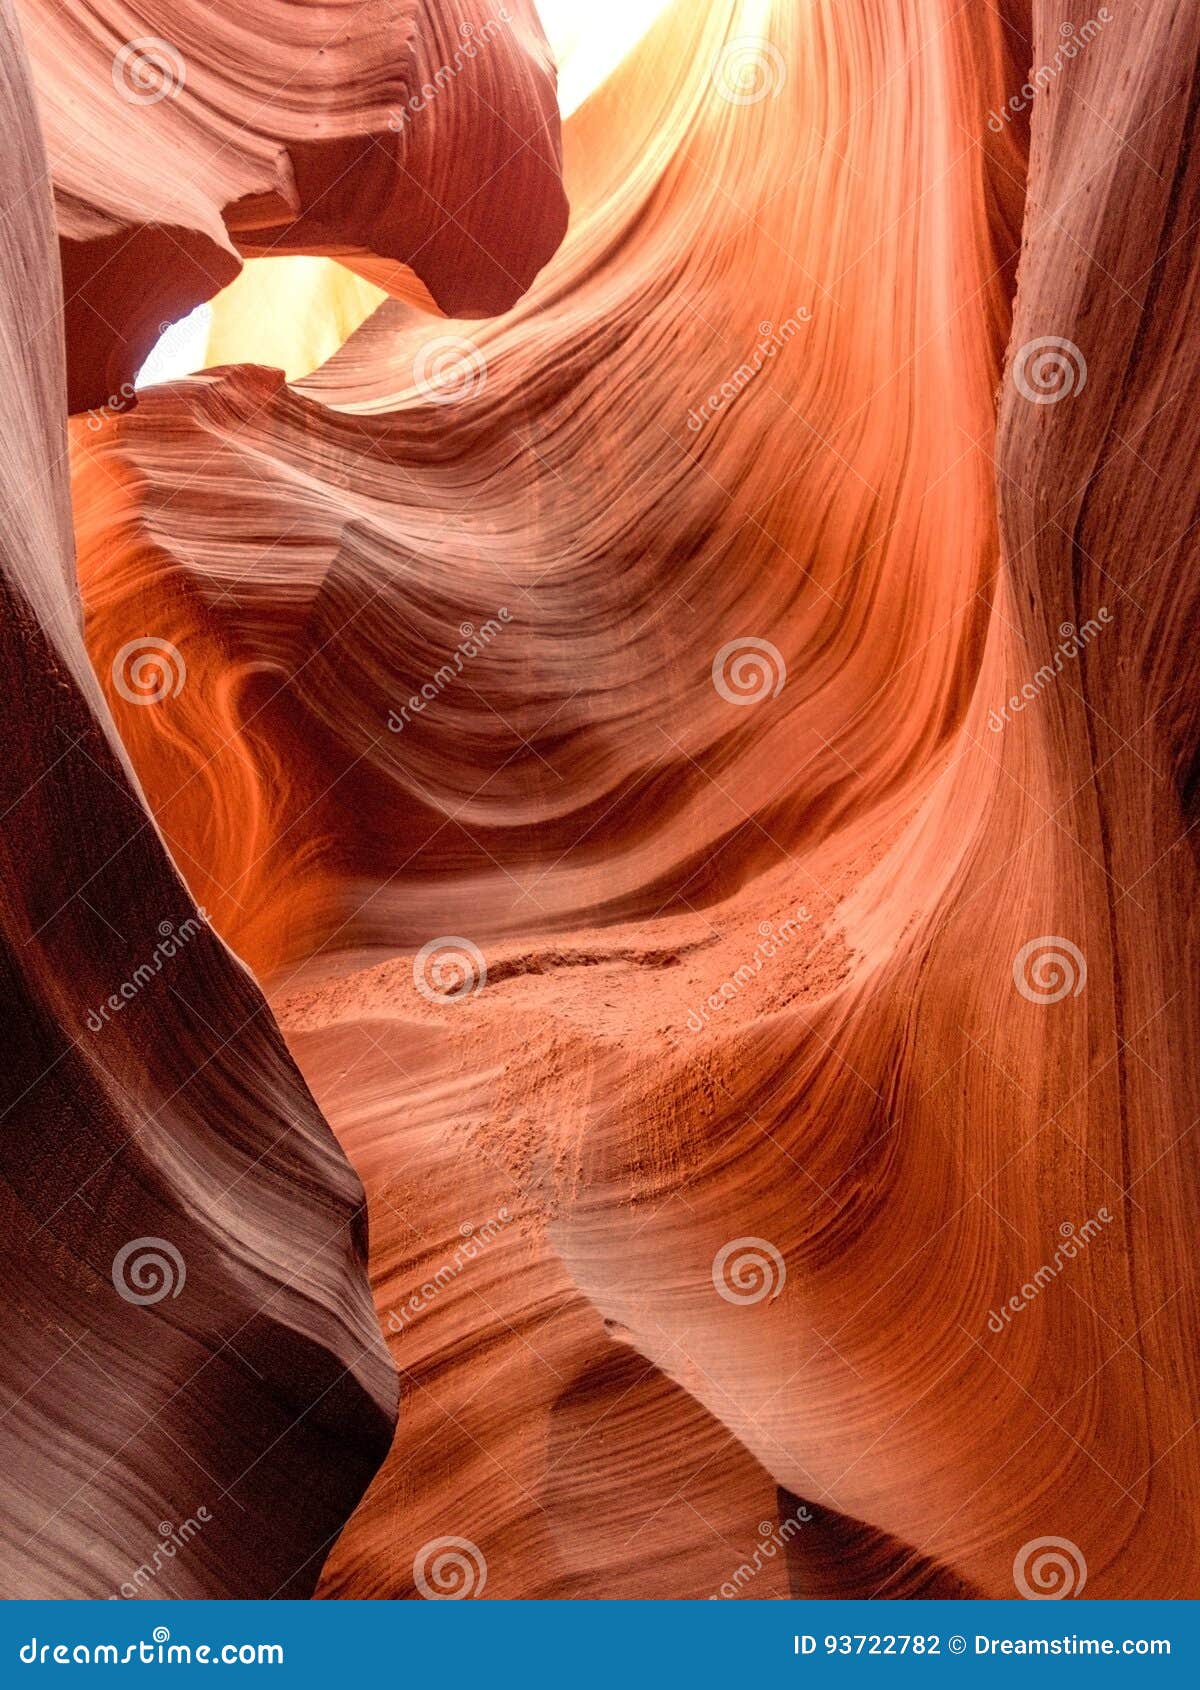 Antelope Canyon Caves Stock Photo Image Of Formations 93722782